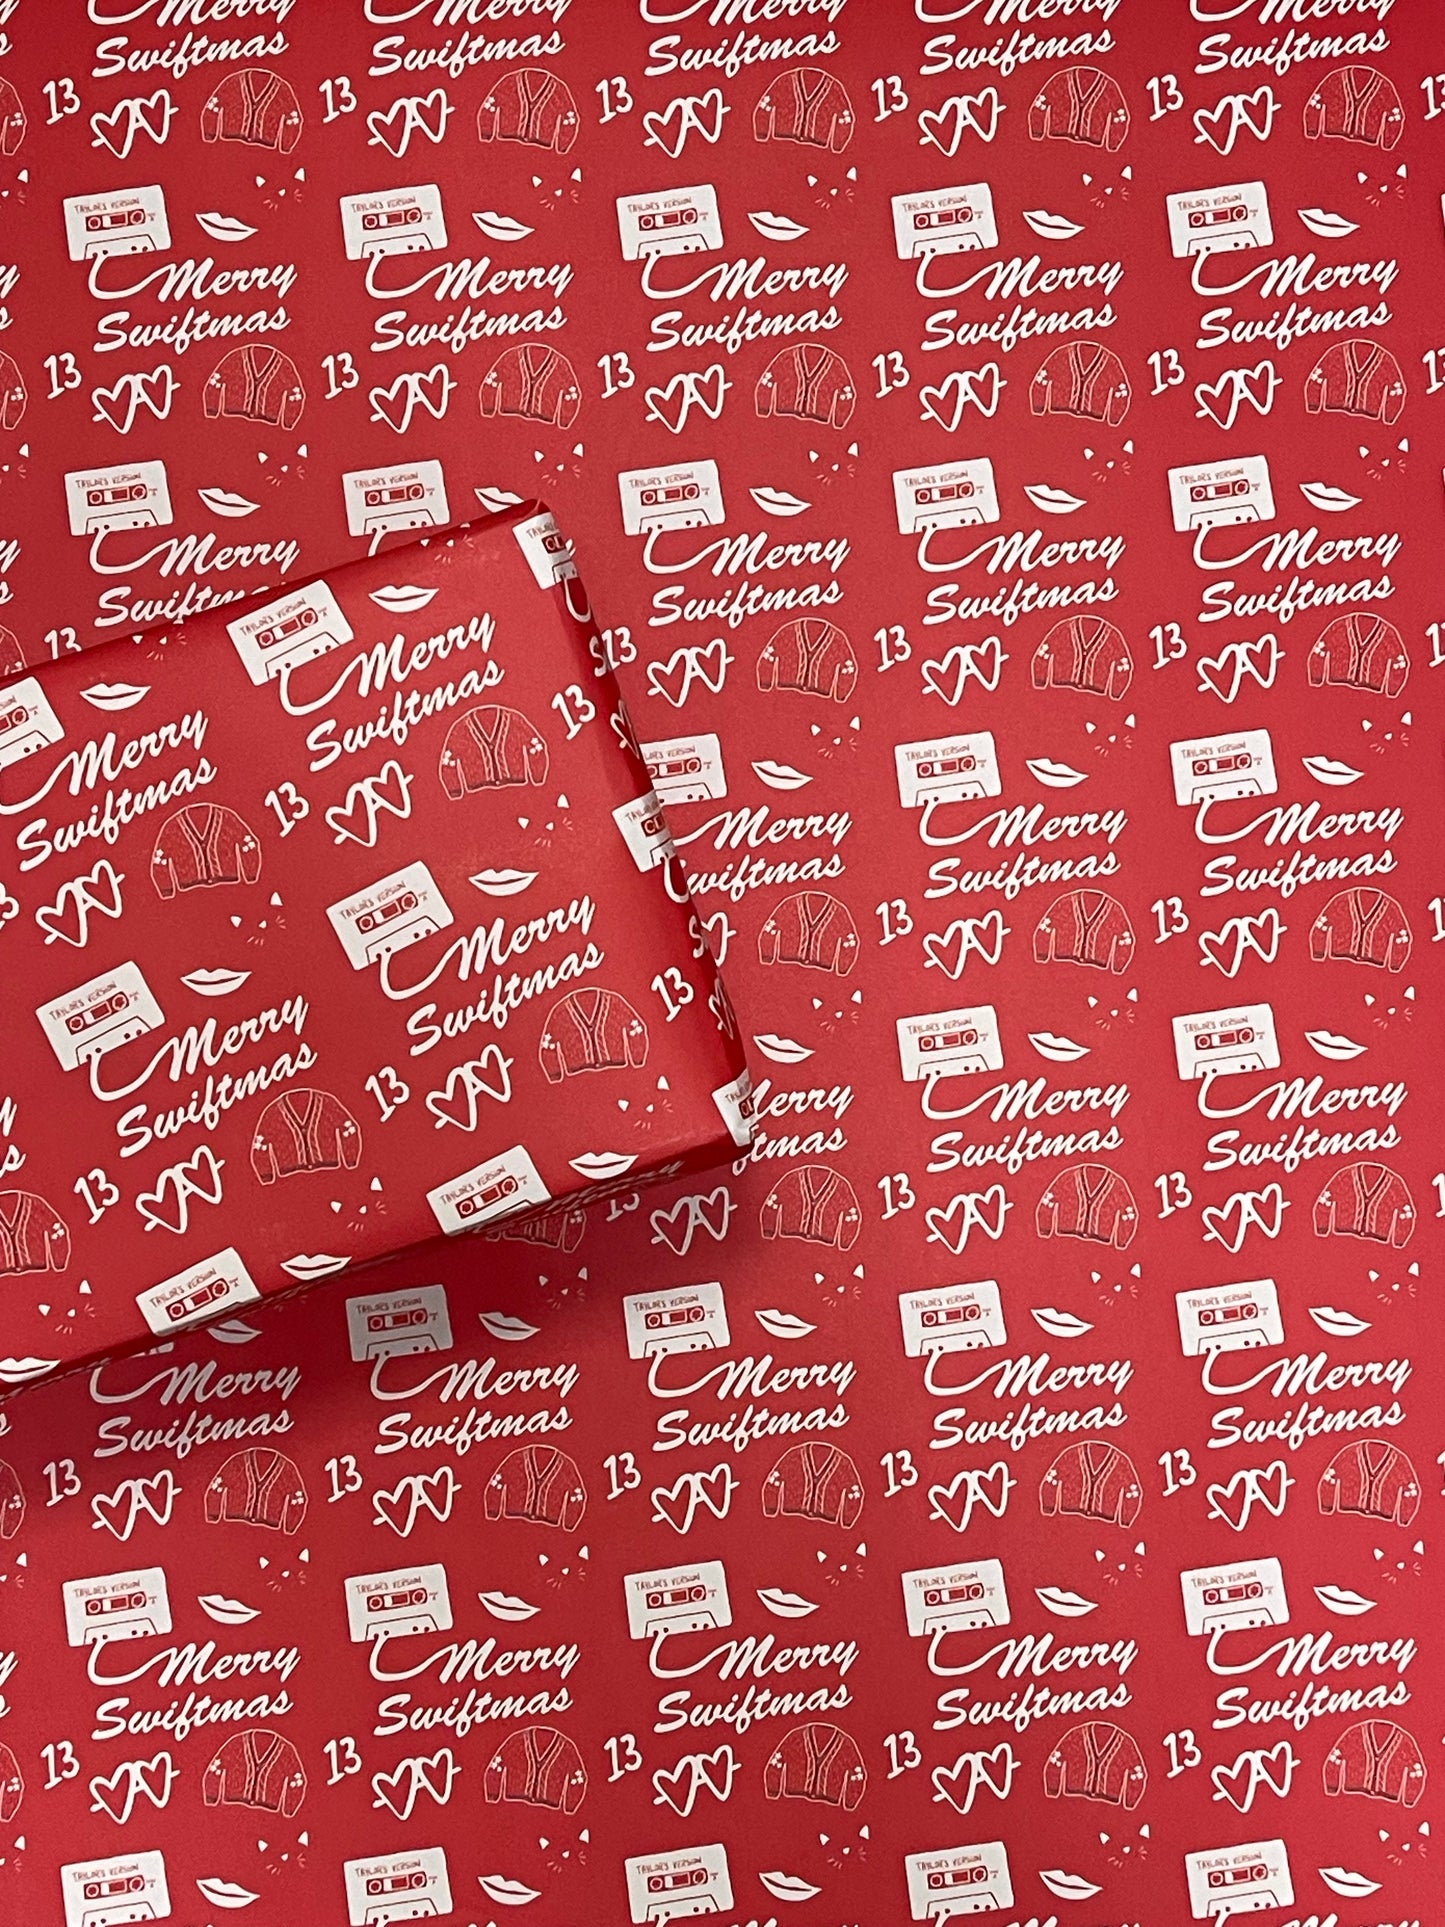 Merry Swiftmas Wrapping Paper Sheets (4 pieces)